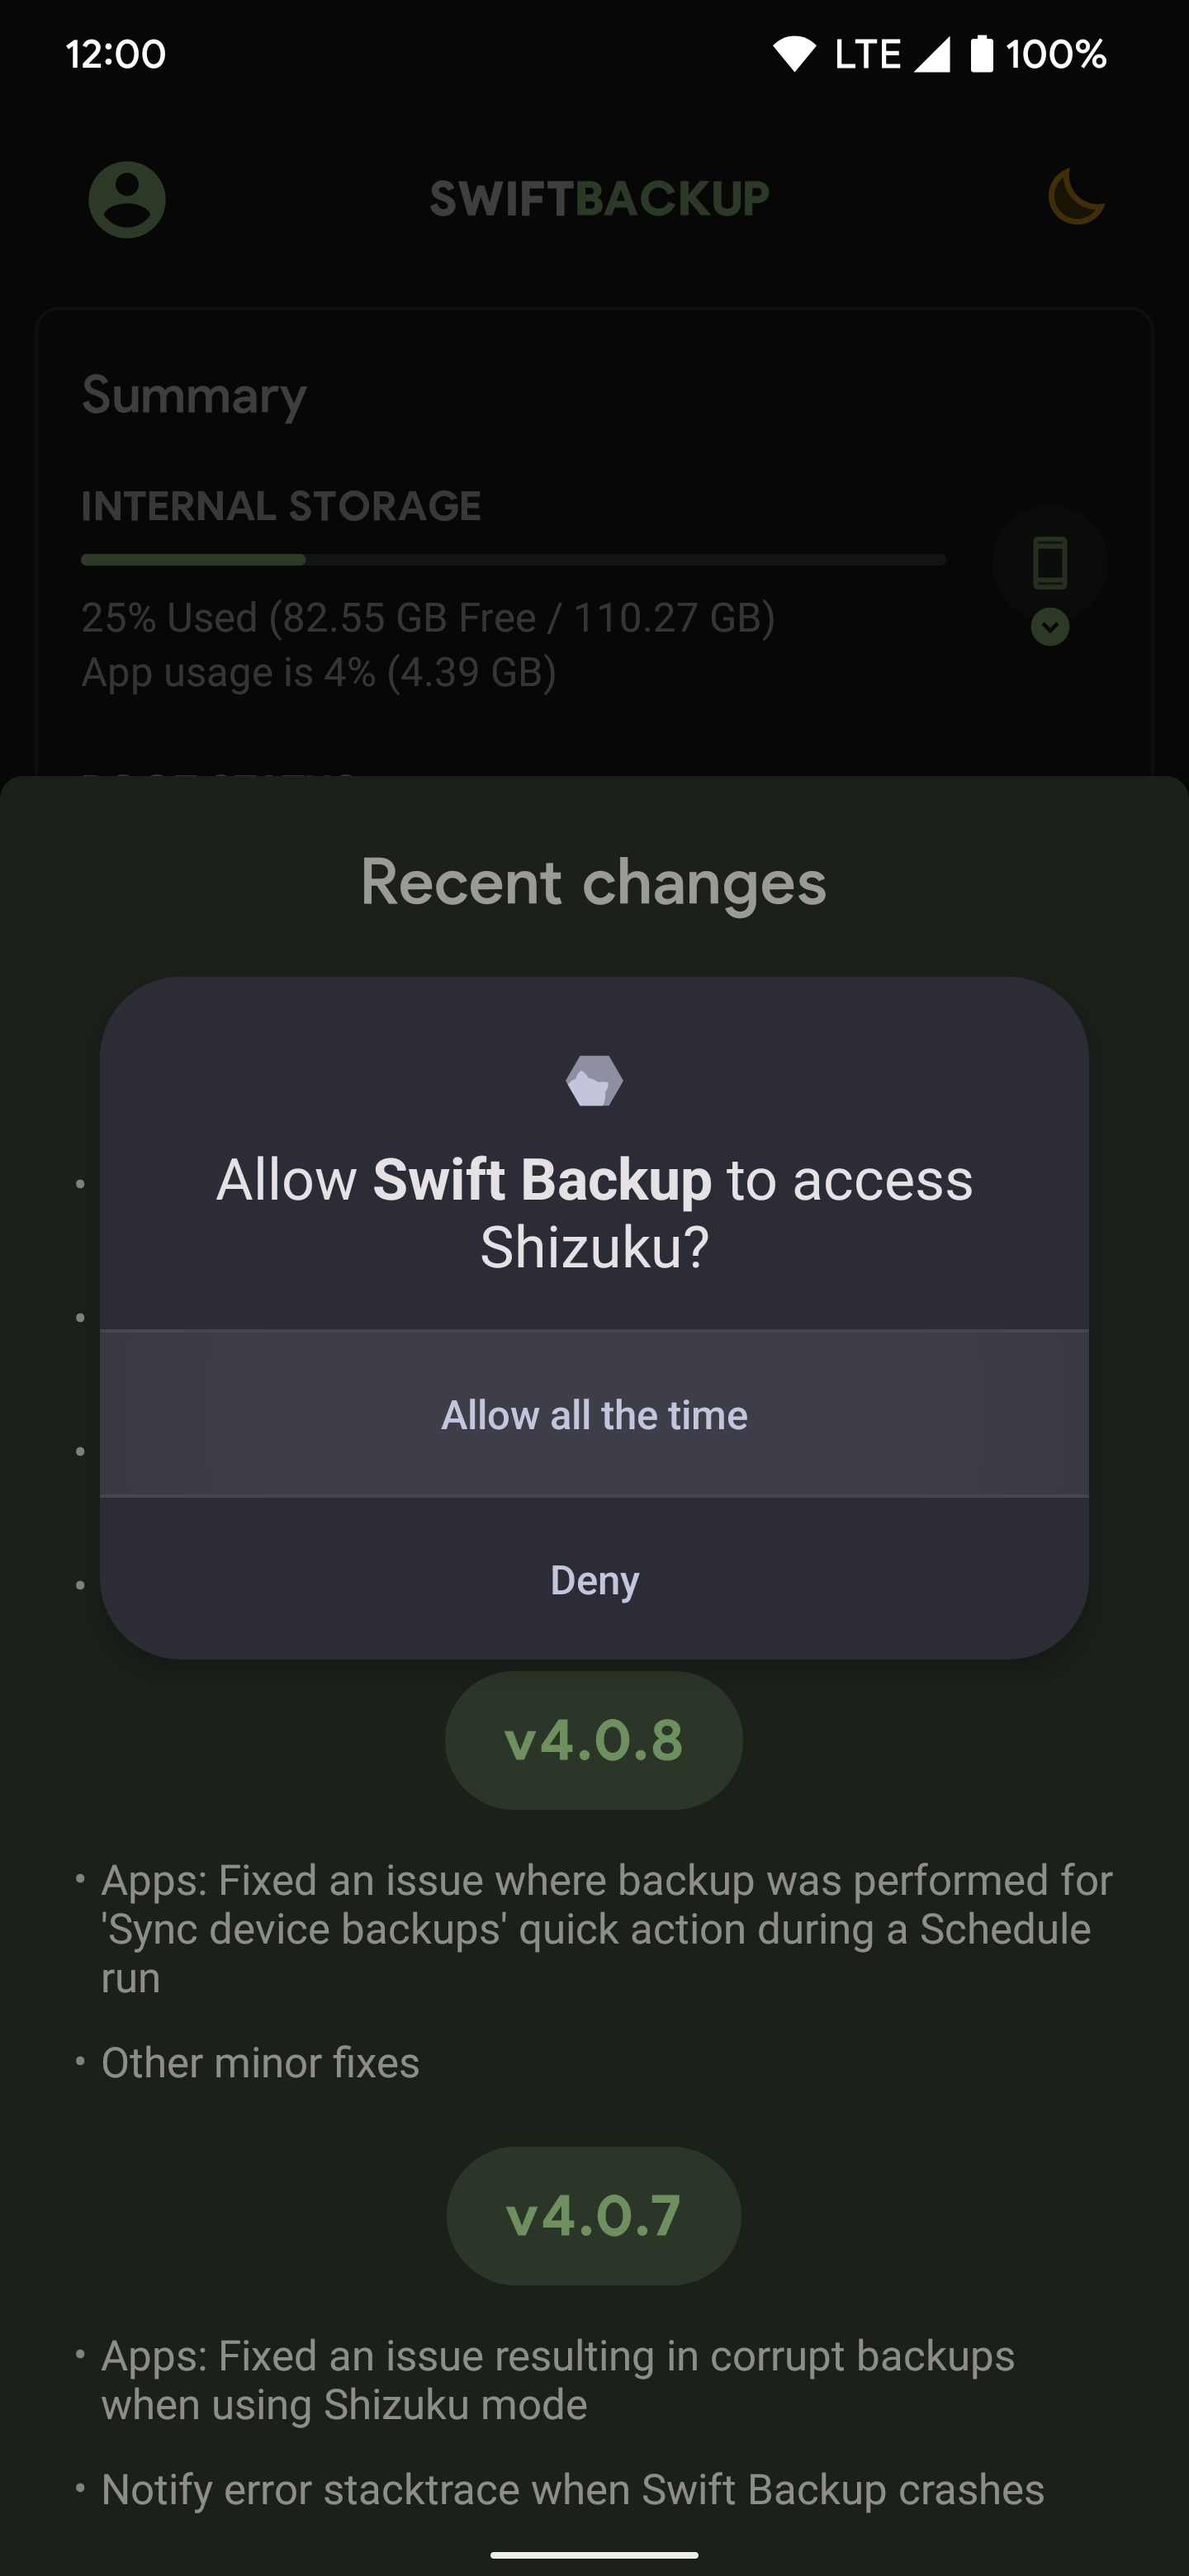 Allowing the Swift Backup app access to the Shizuku service